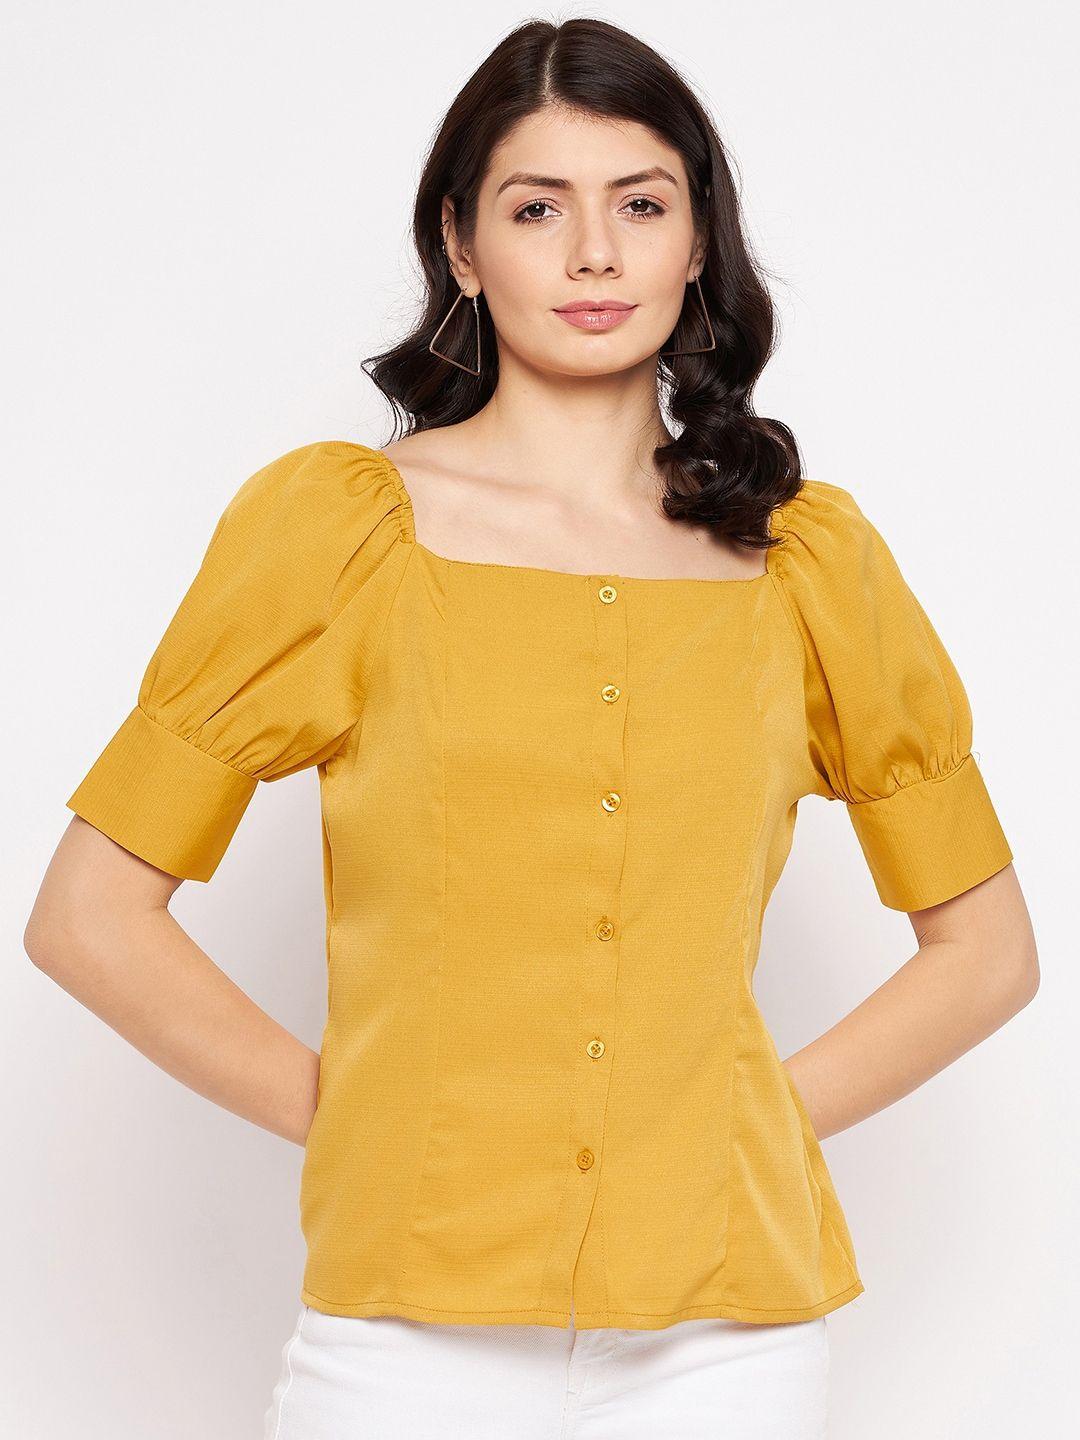 purys mustard yellow georgette shirt style top